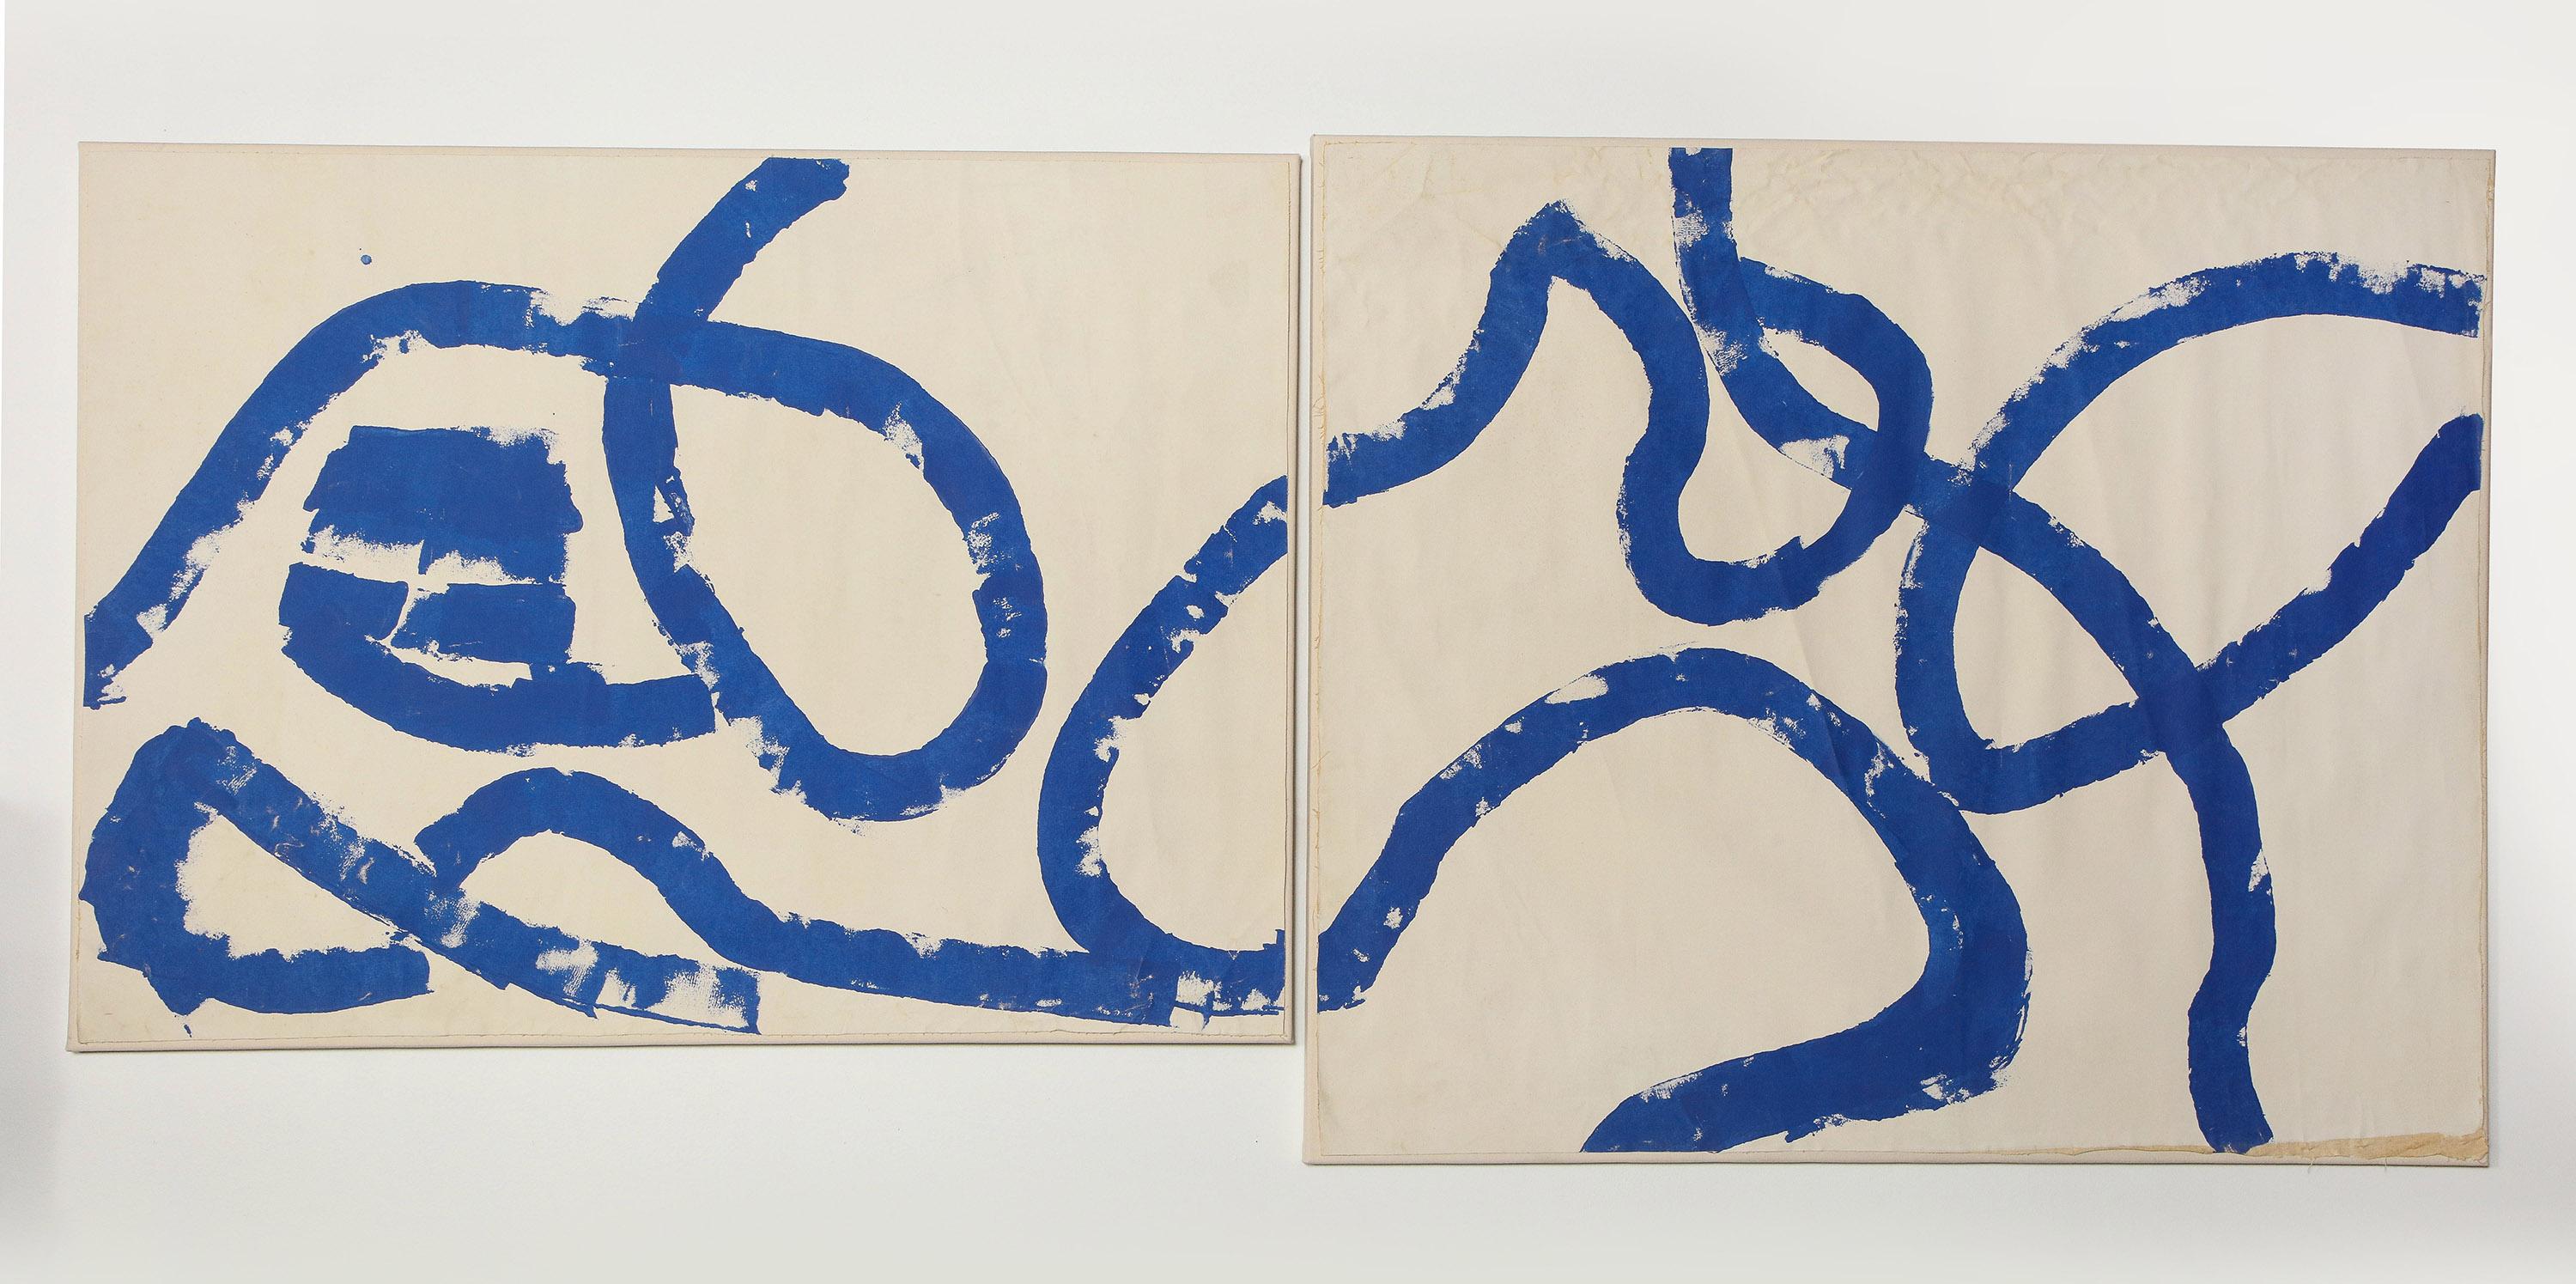 Sylvia Rutkoff (1919-2011)
sr23-1
1960s
"Blue Abstract"
Diptych
Oil paint on unstretched canvas
1) 57"x41" 2) 56.5"x49" total width 114" attached to stretched canvas using archival methods
Unsigned
Collection acquired from family estate

Minor wear